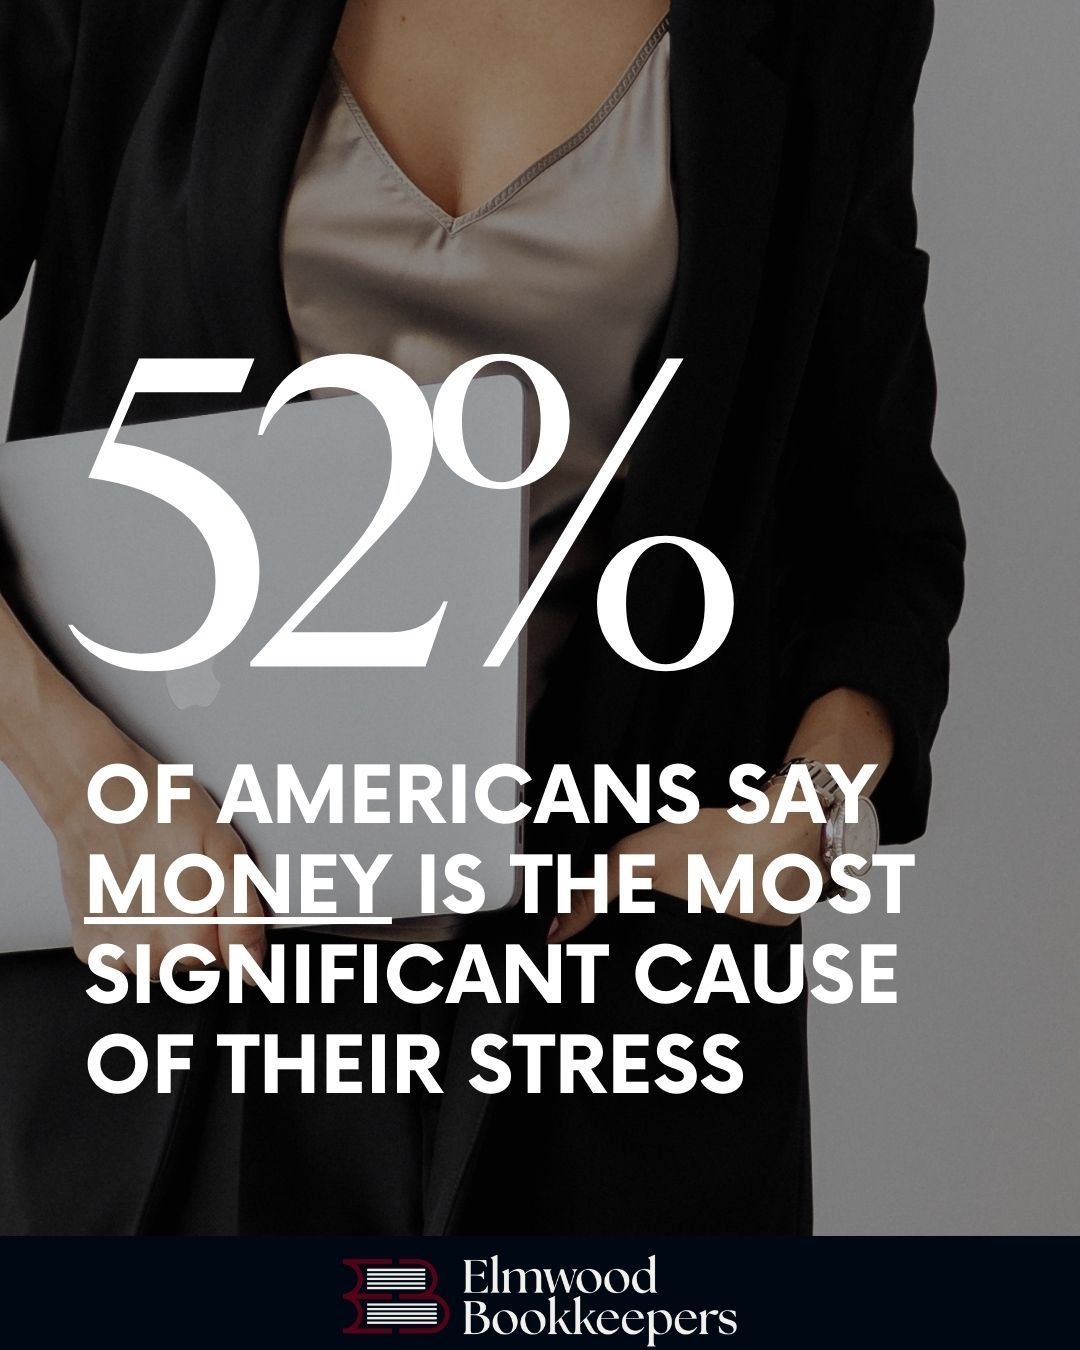 May is Mental Health Awareness Month, so I want to chat about the effect finances can have on your mental health.

According to a 2023 study by Bankrate, more than HALF of Americans name money as the number one stressor in their lives. 💸

To put it 